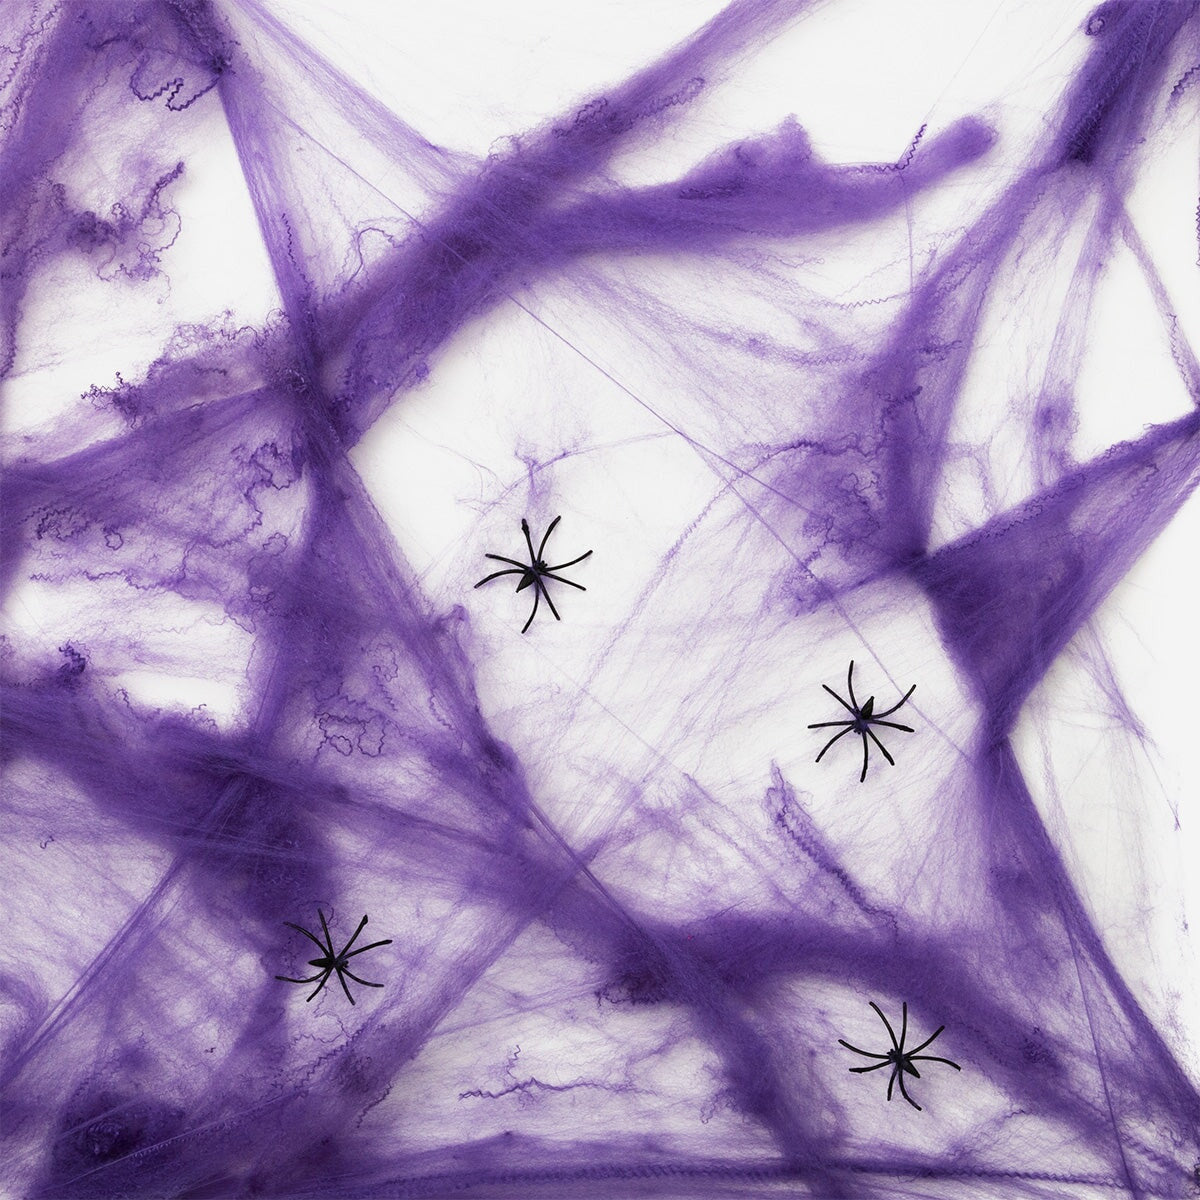 Cobweb with spiders. 50x200 cm Party Flying Tiger Copenhagen 